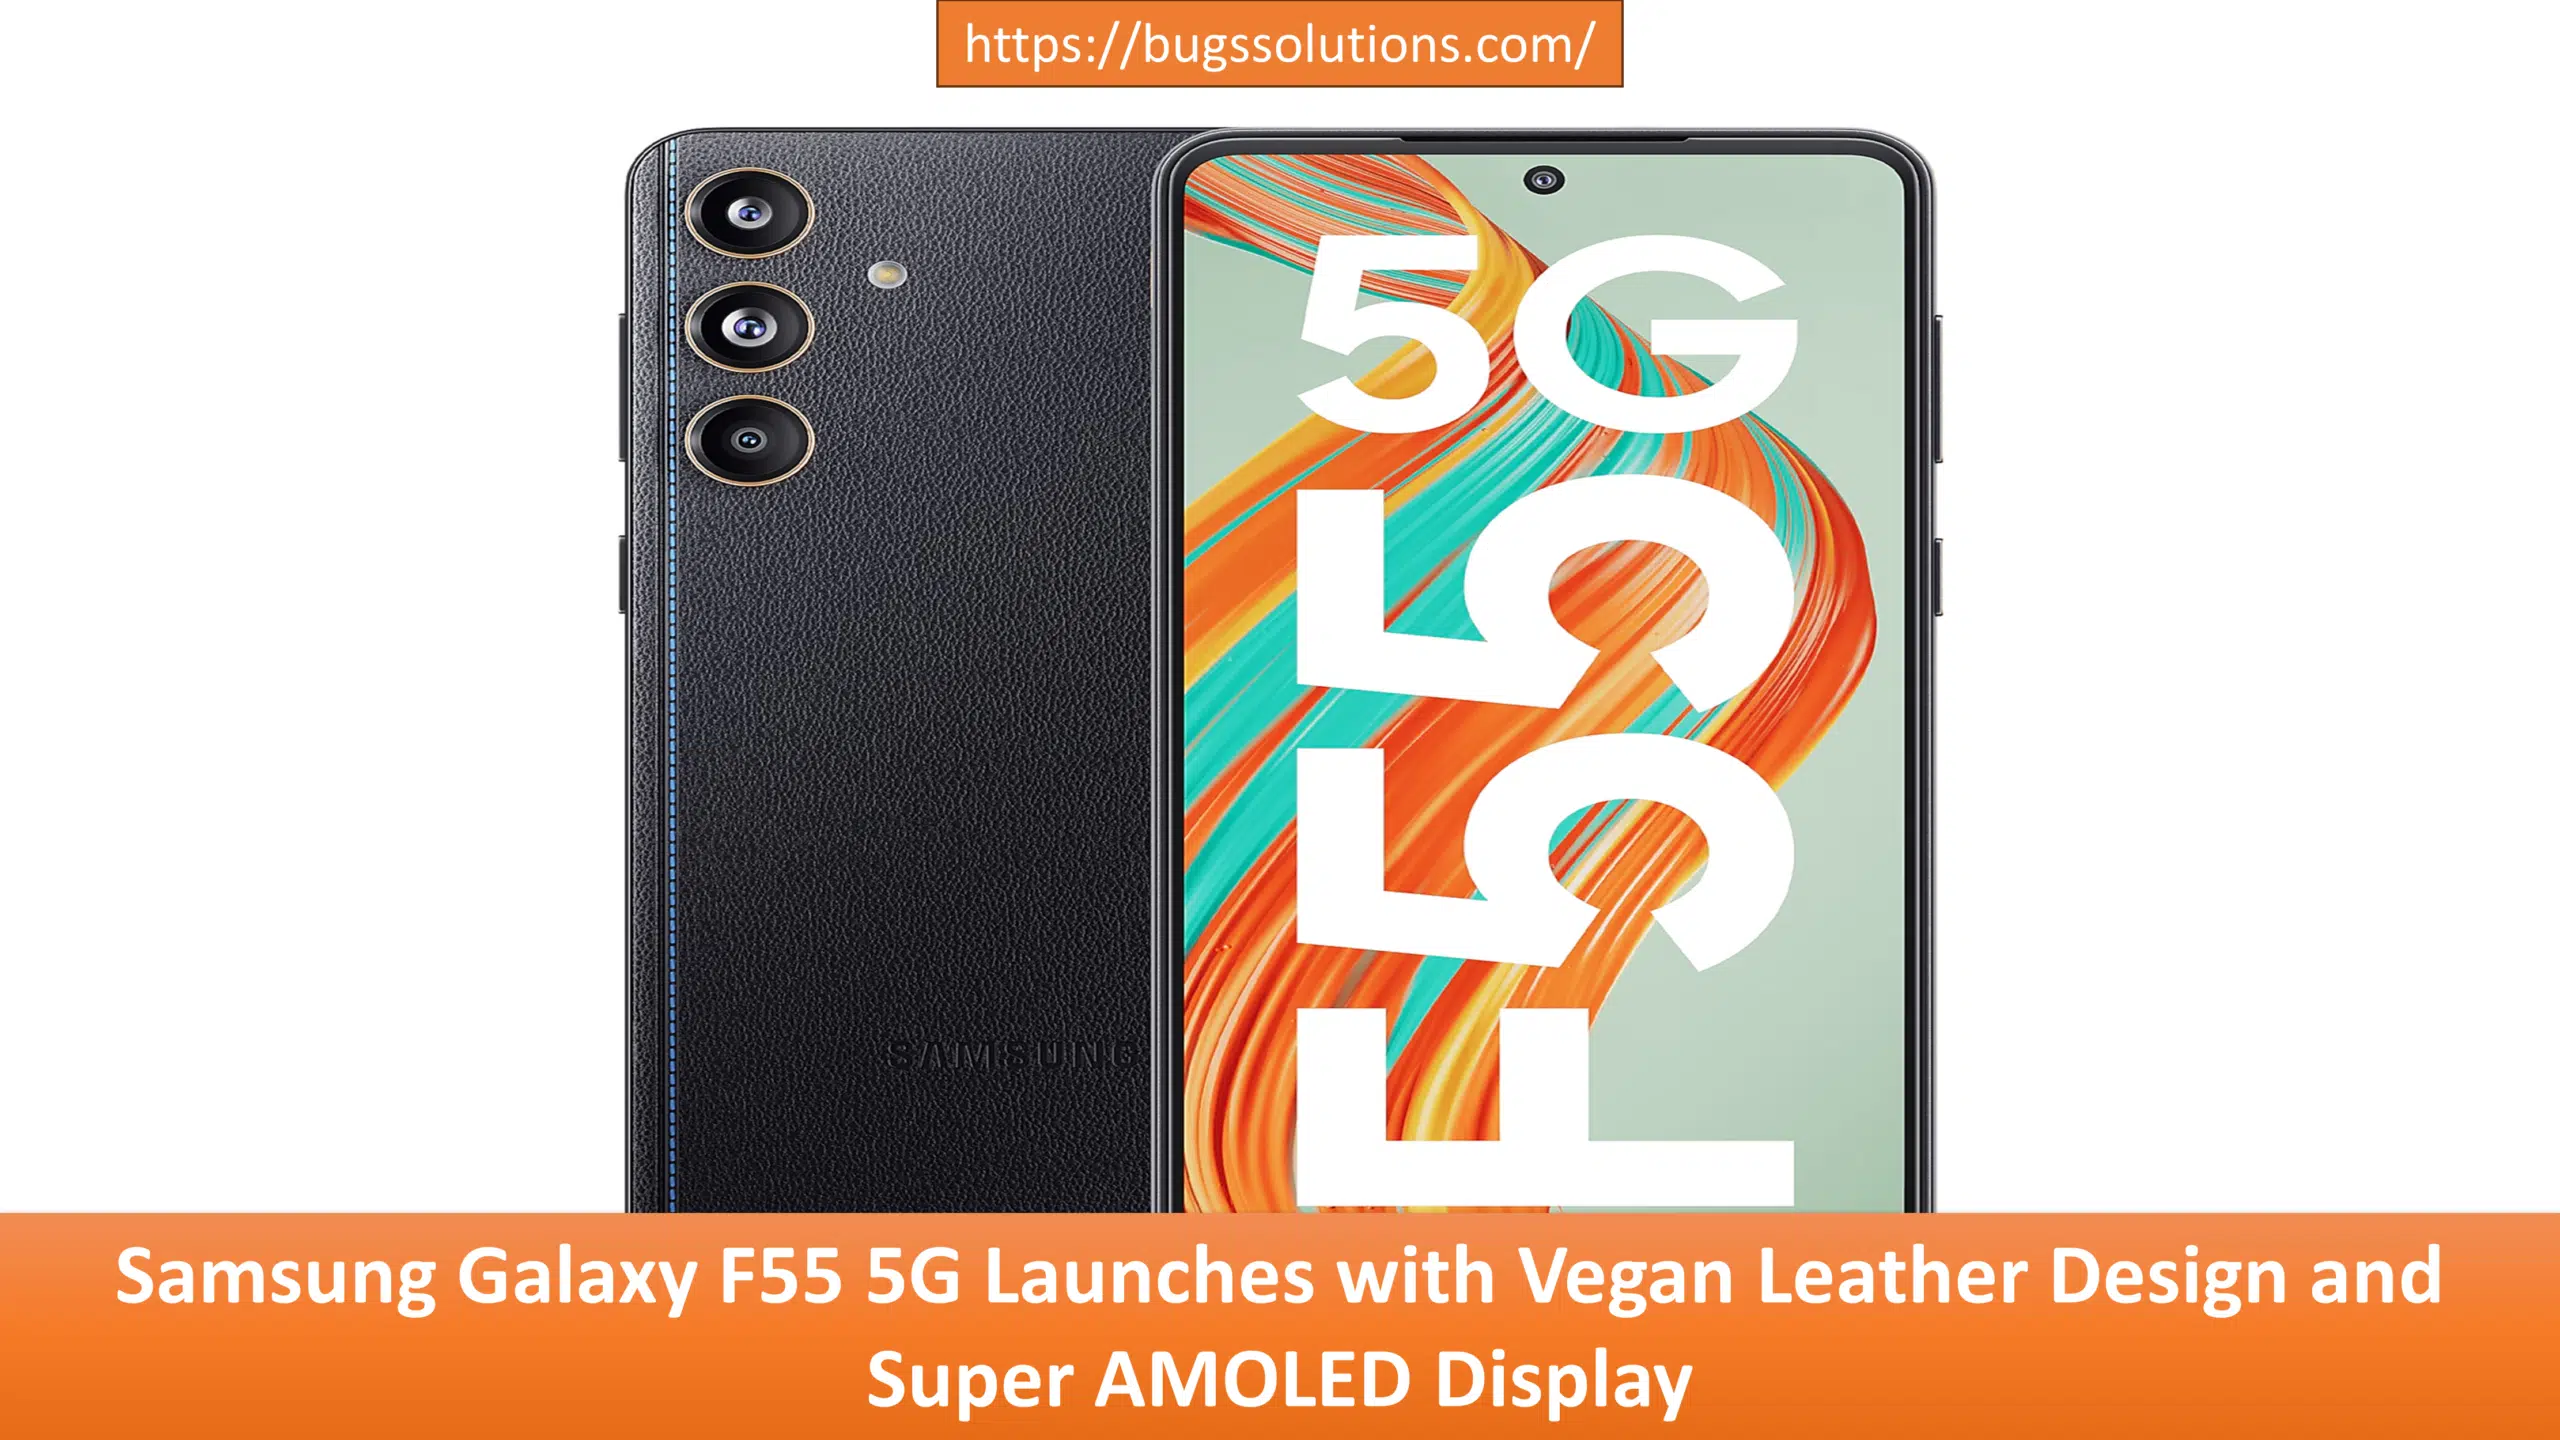 Samsung Galaxy F55 5G Launches with Vegan Leather Design and Super AMOLED Display